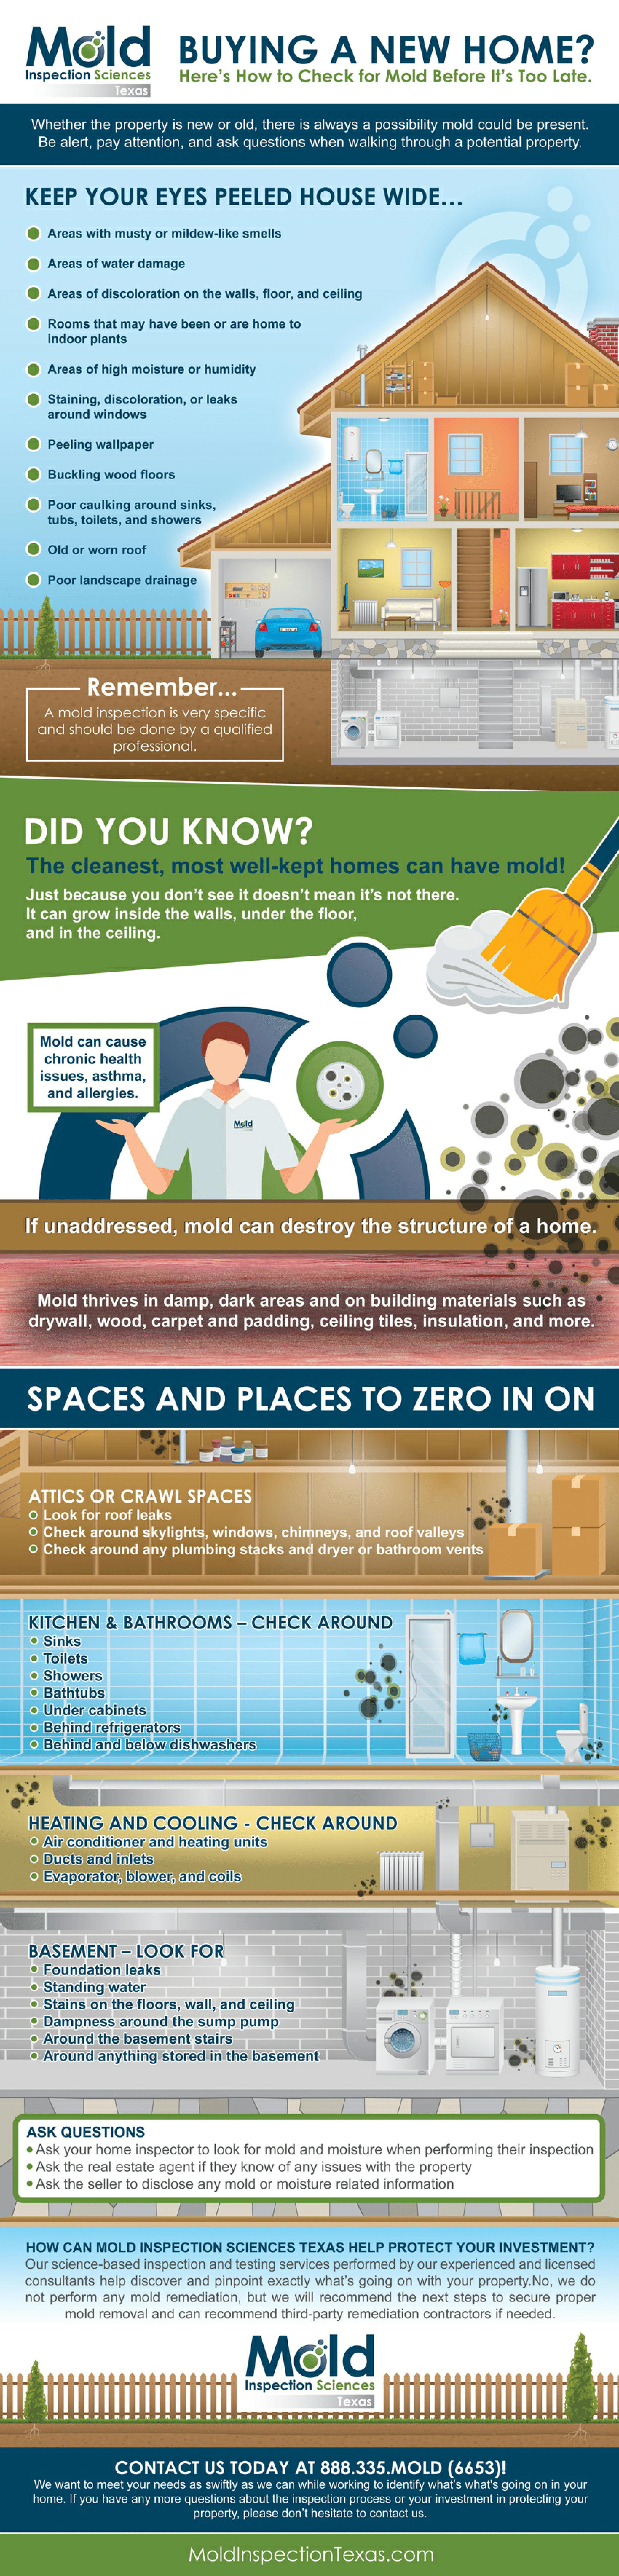 “Buying a New Home? Here’s How to Check for Mold Before It’s Too Late” Infographic